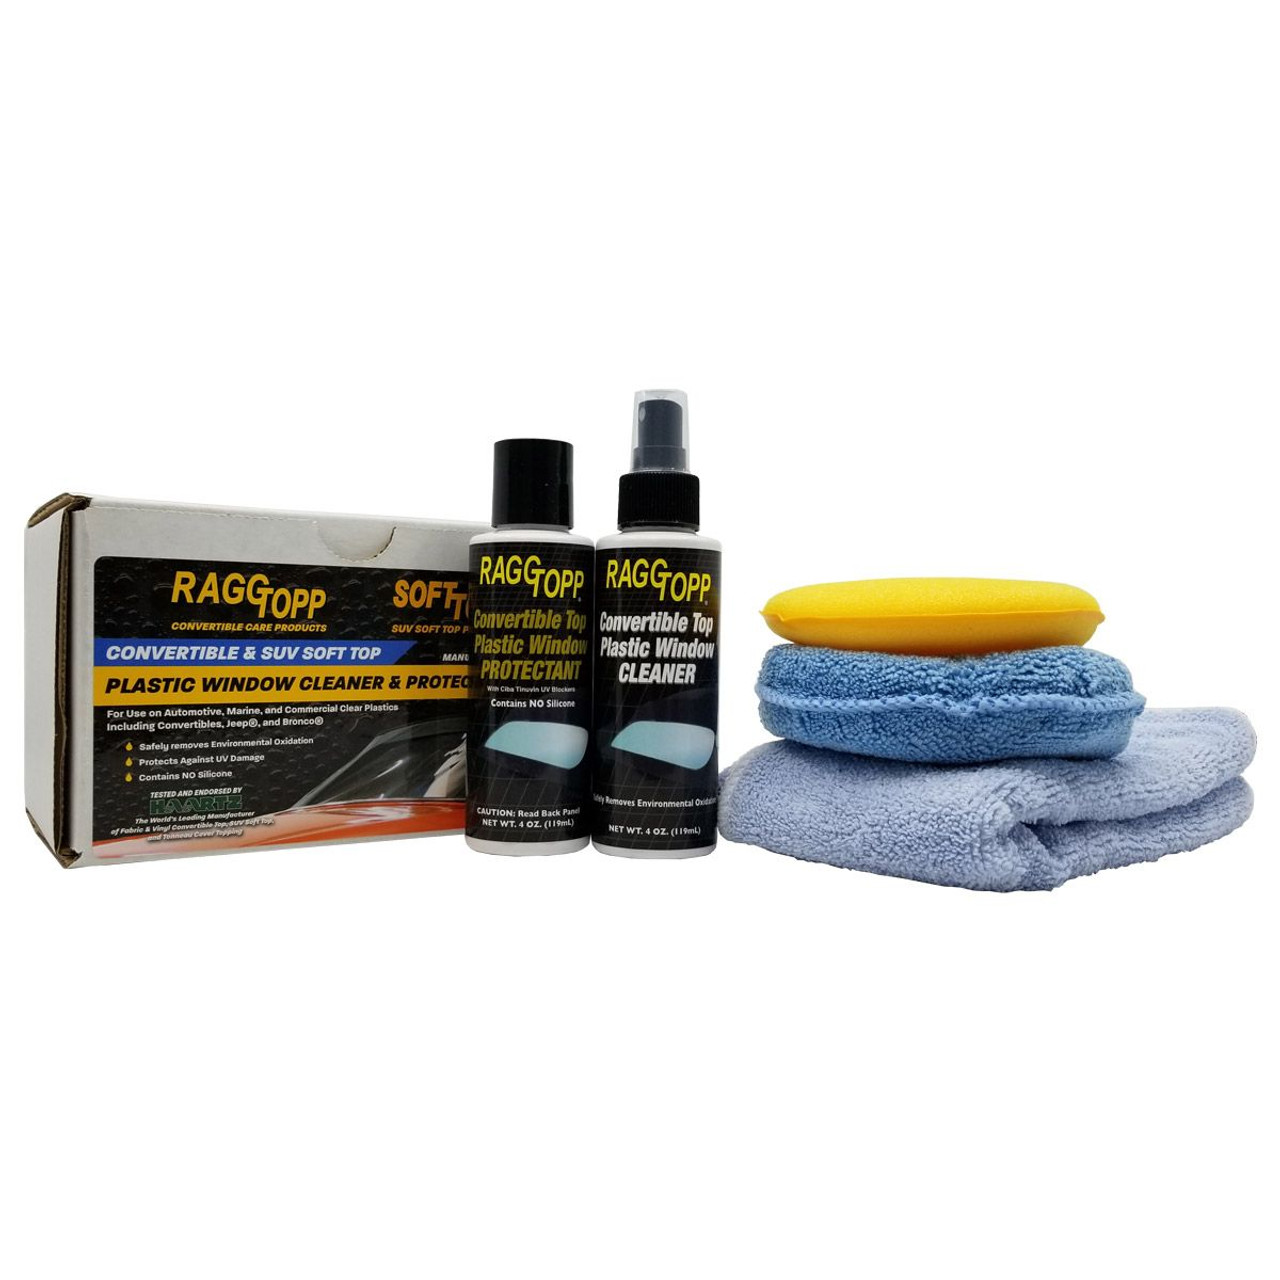 https://cdn11.bigcommerce.com/s-82c91564ki/images/stencil/1280x1280/products/7033/7573/raggtopp-convertible-top-plastic-window-cleaner-protectant-kit-55__90006.1684255286.jpg?c=1